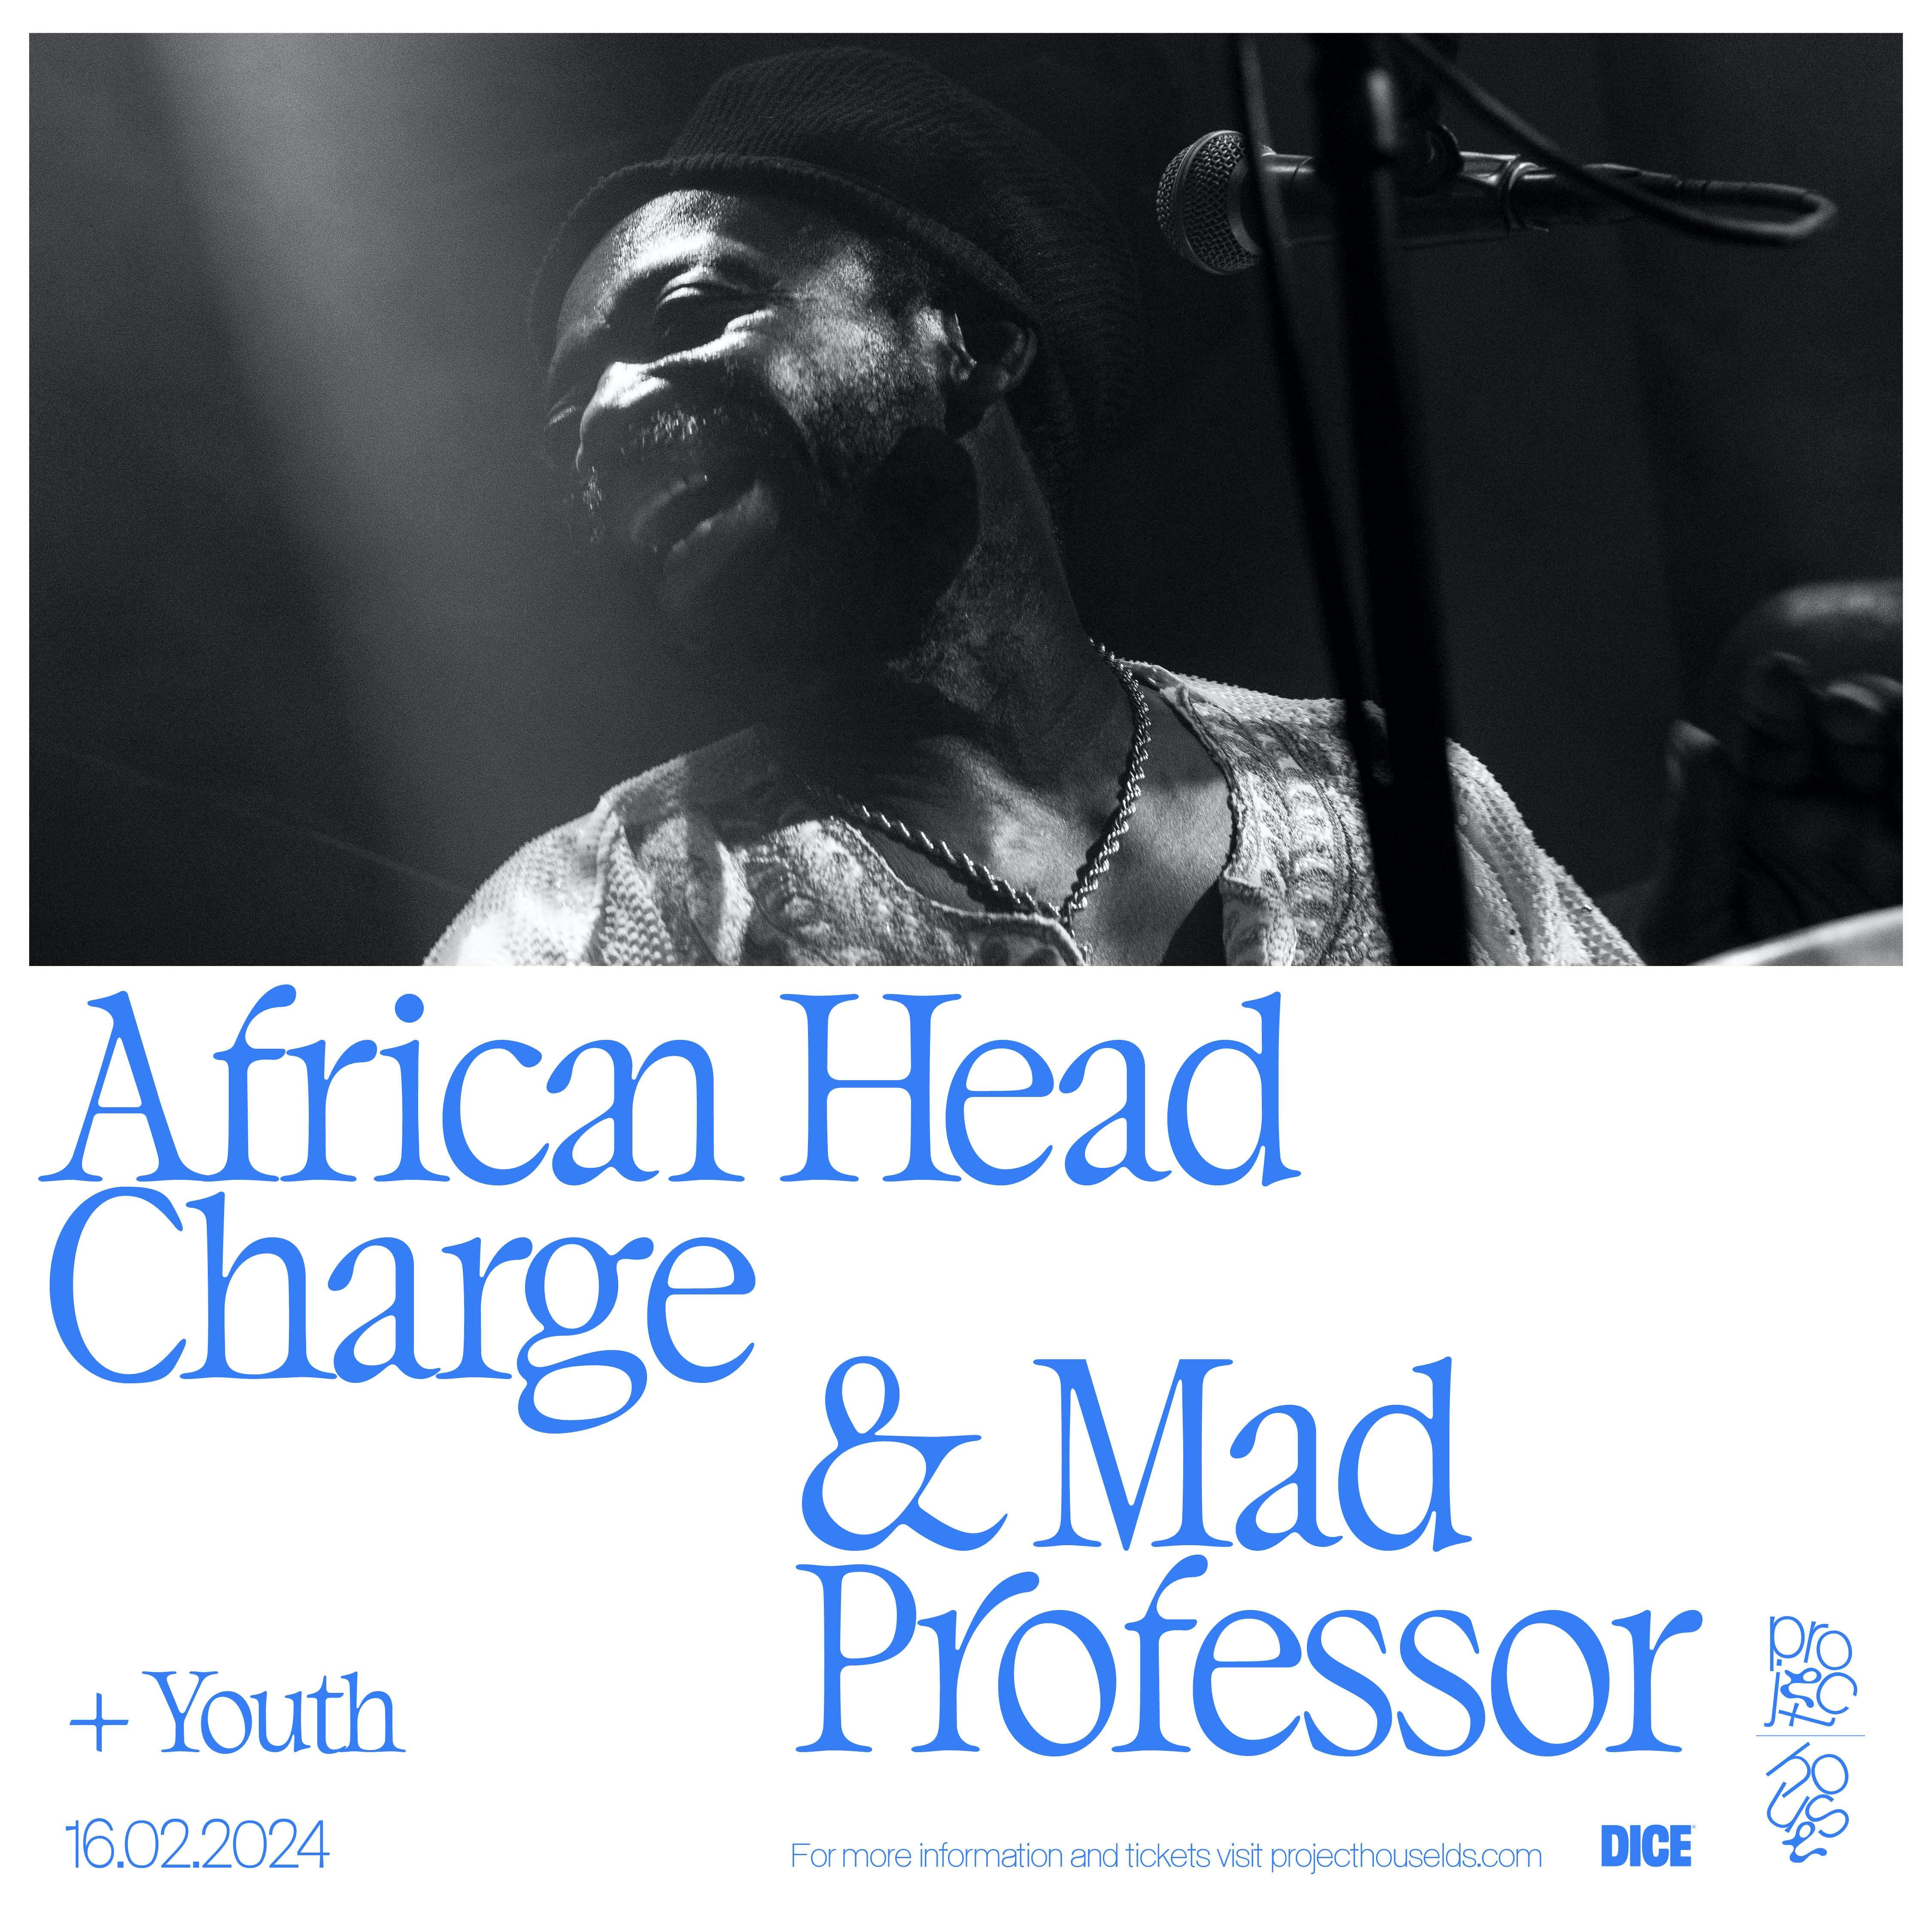 African Head Charge - フライヤー表